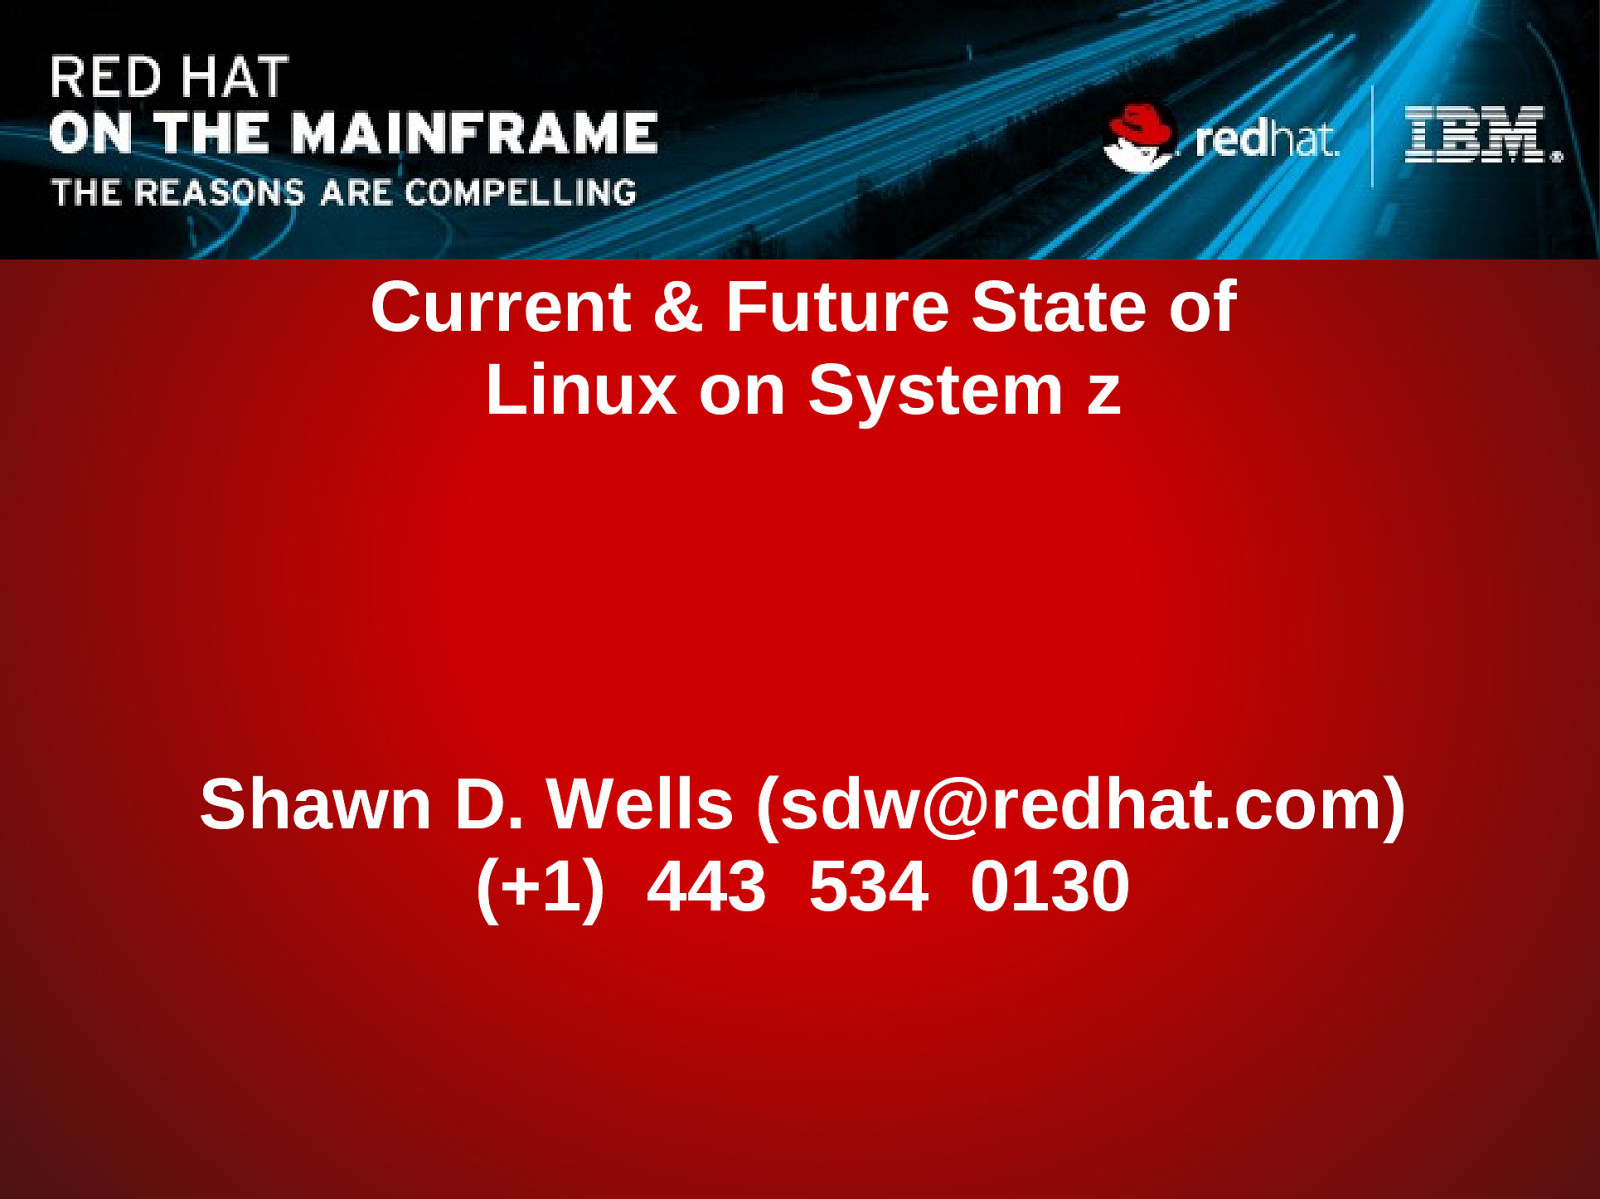 Red Hat Solutions for System z